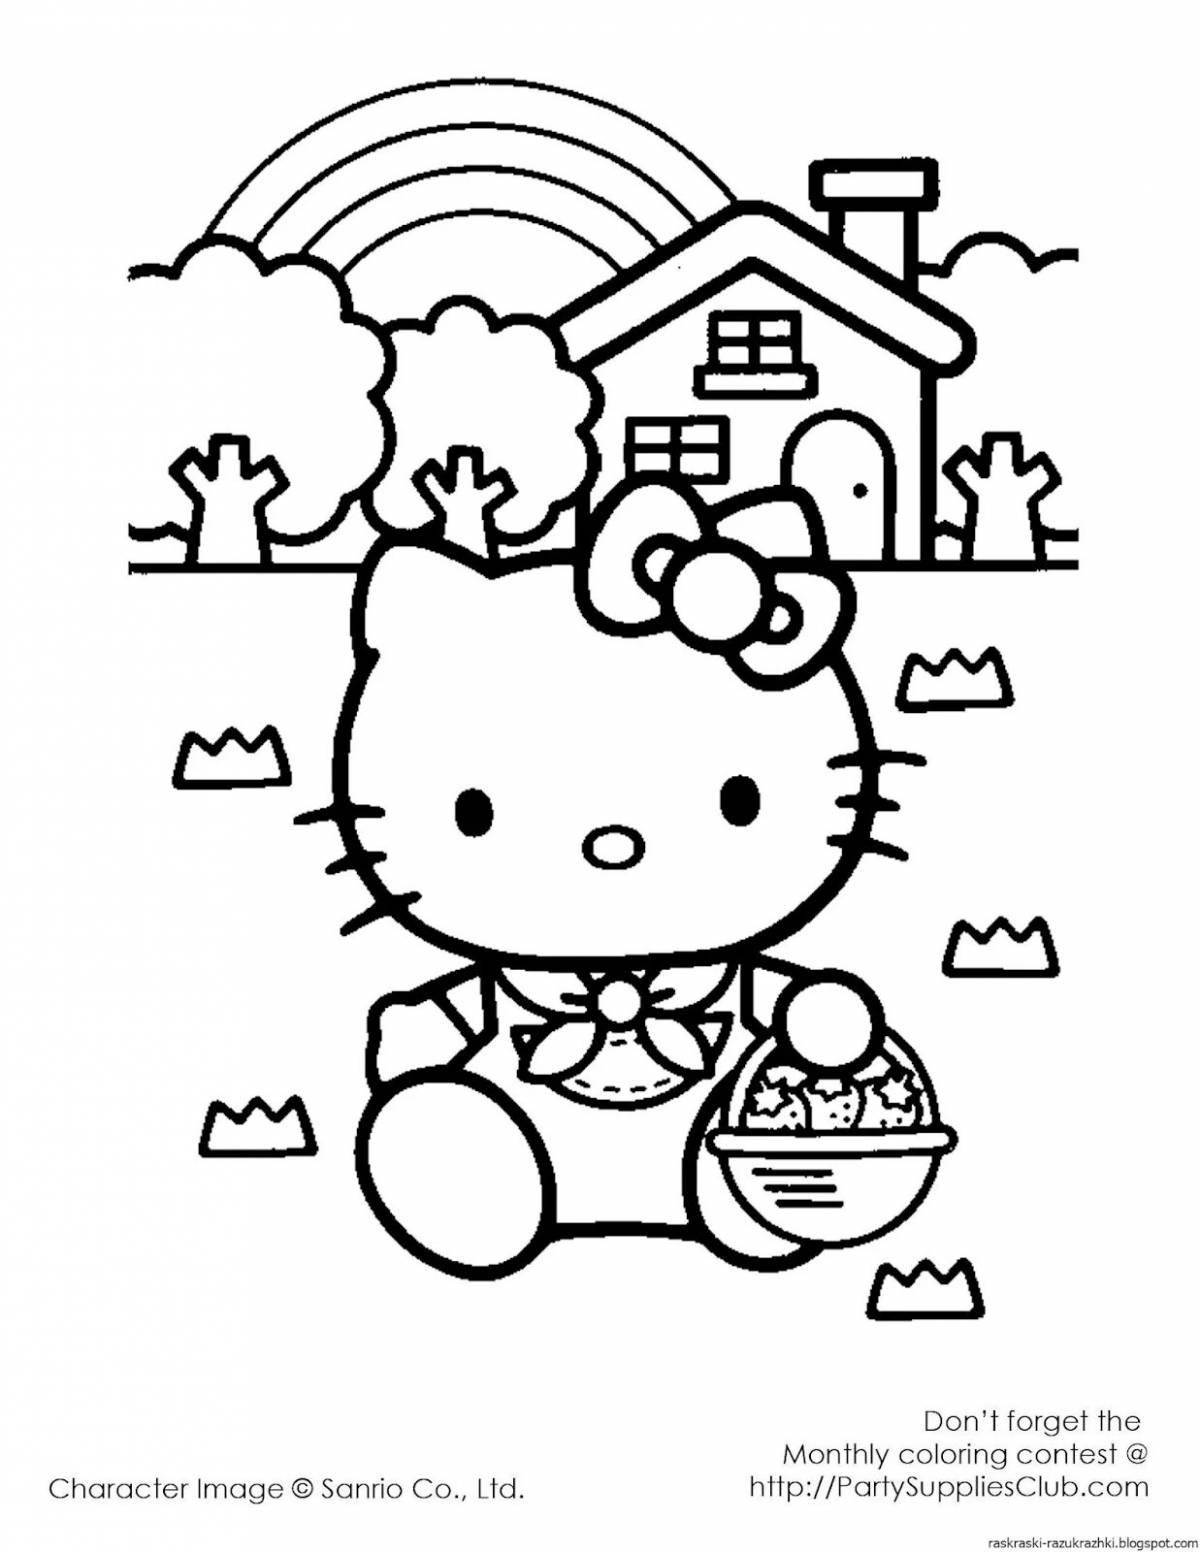 Fancy coloring by numbers hello kitty